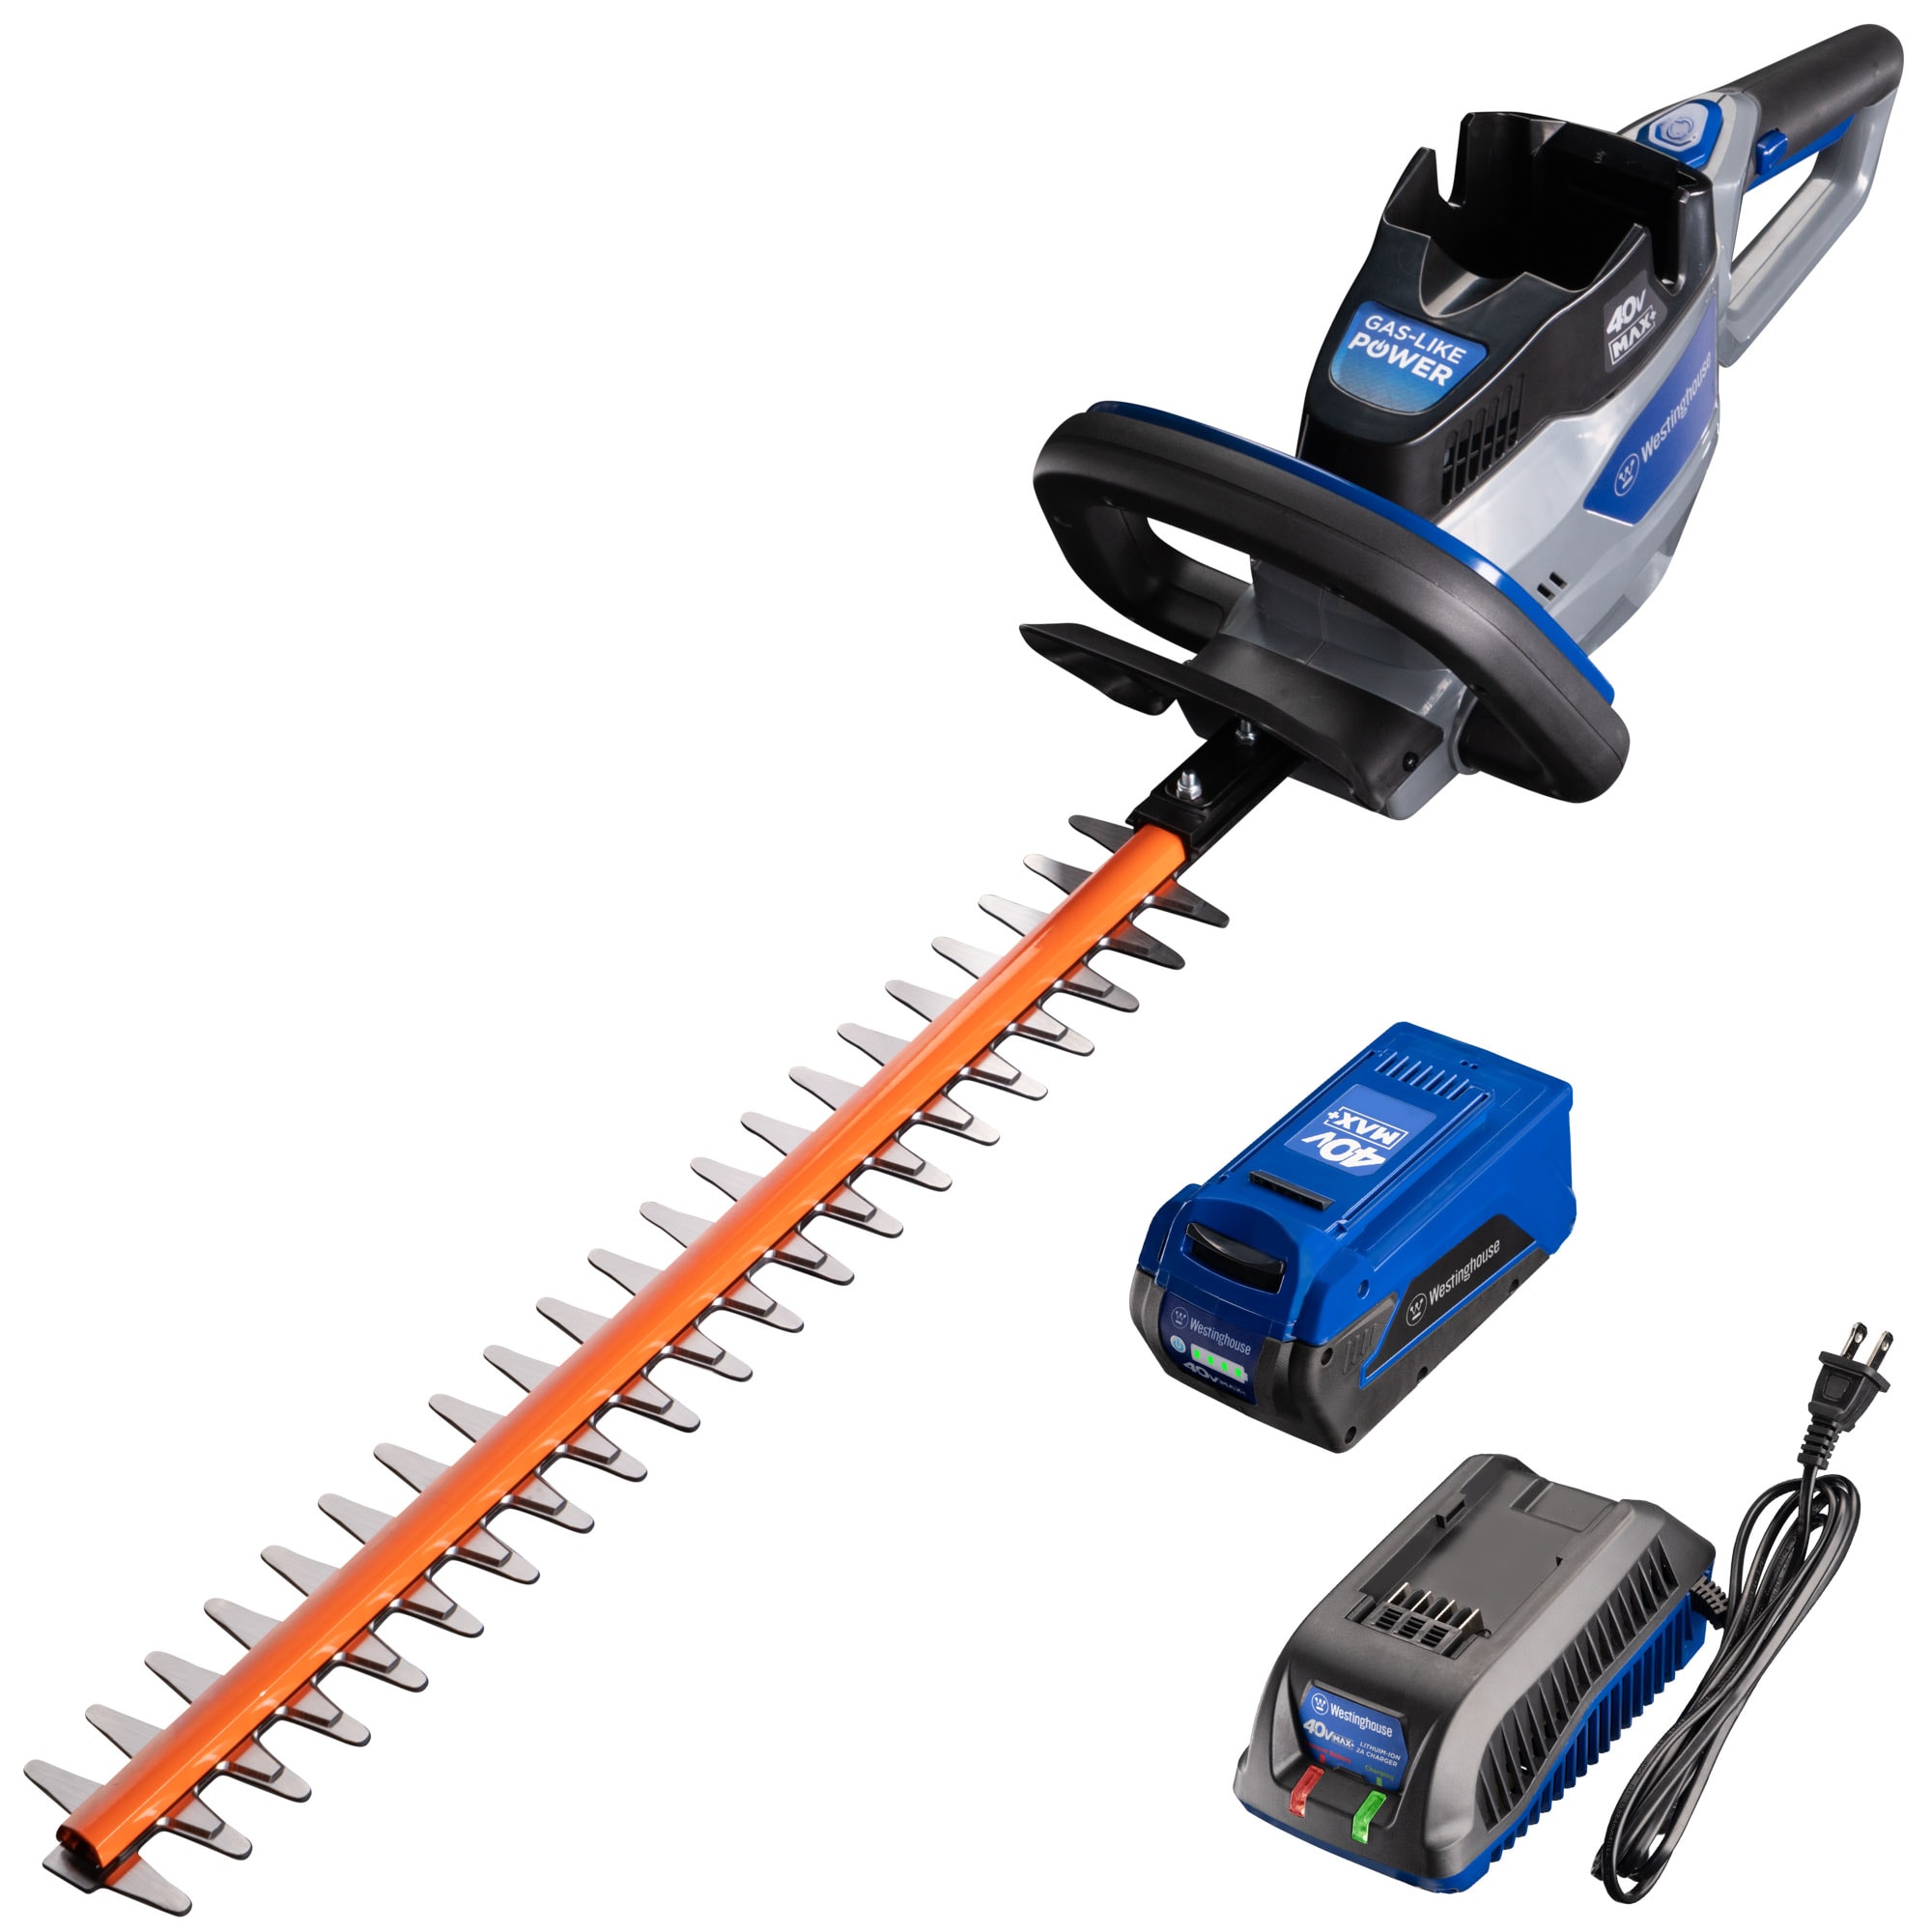 40V Max* Lithium 24 In. Powercut Hedge Trimmer